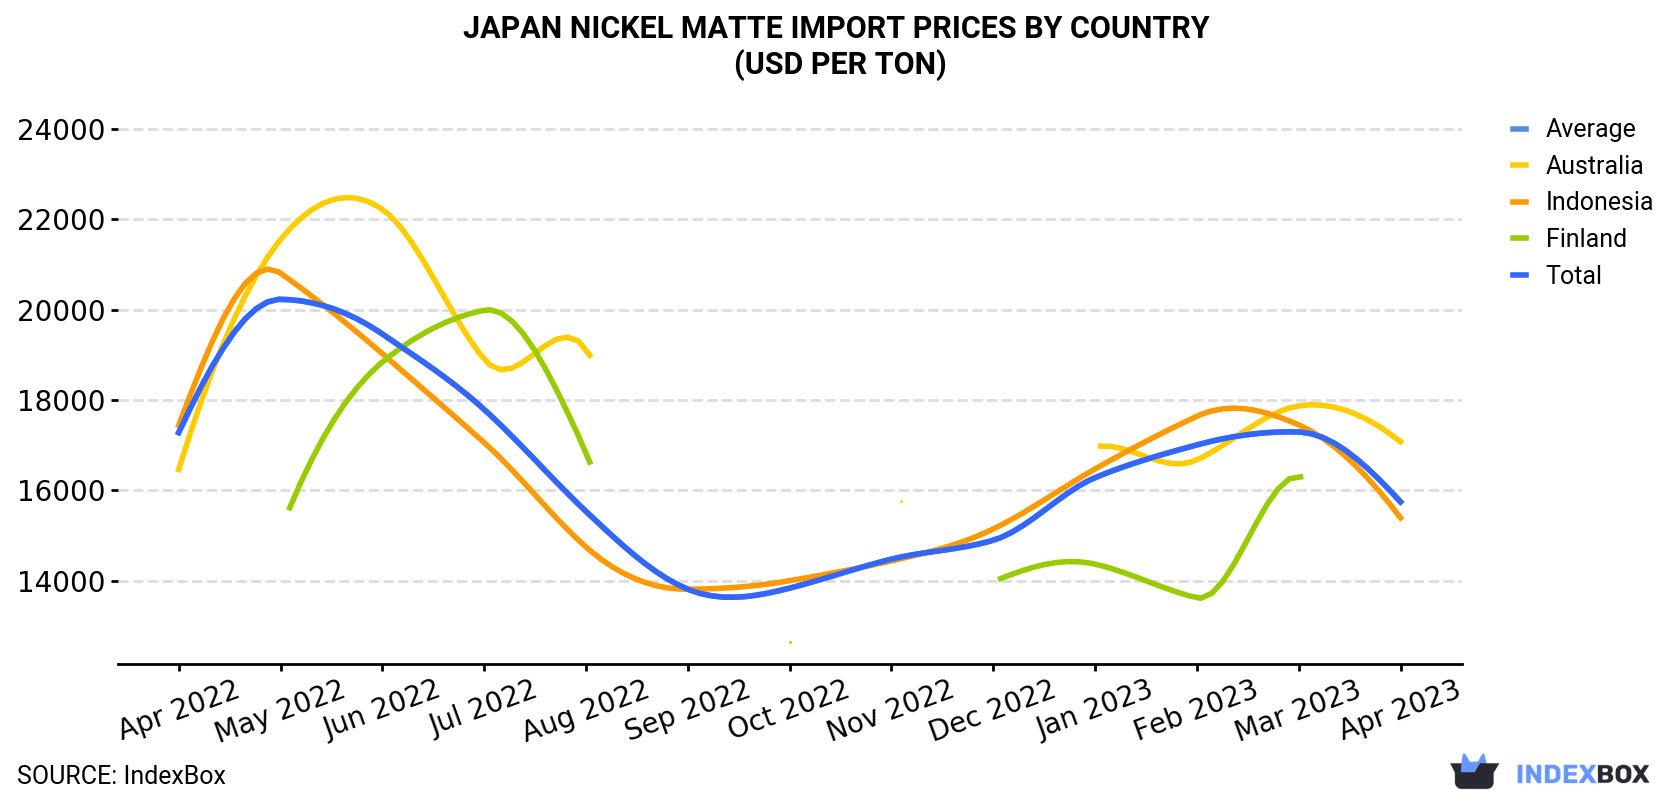 Japan Nickel Matte Import Prices By Country (USD Per Ton)